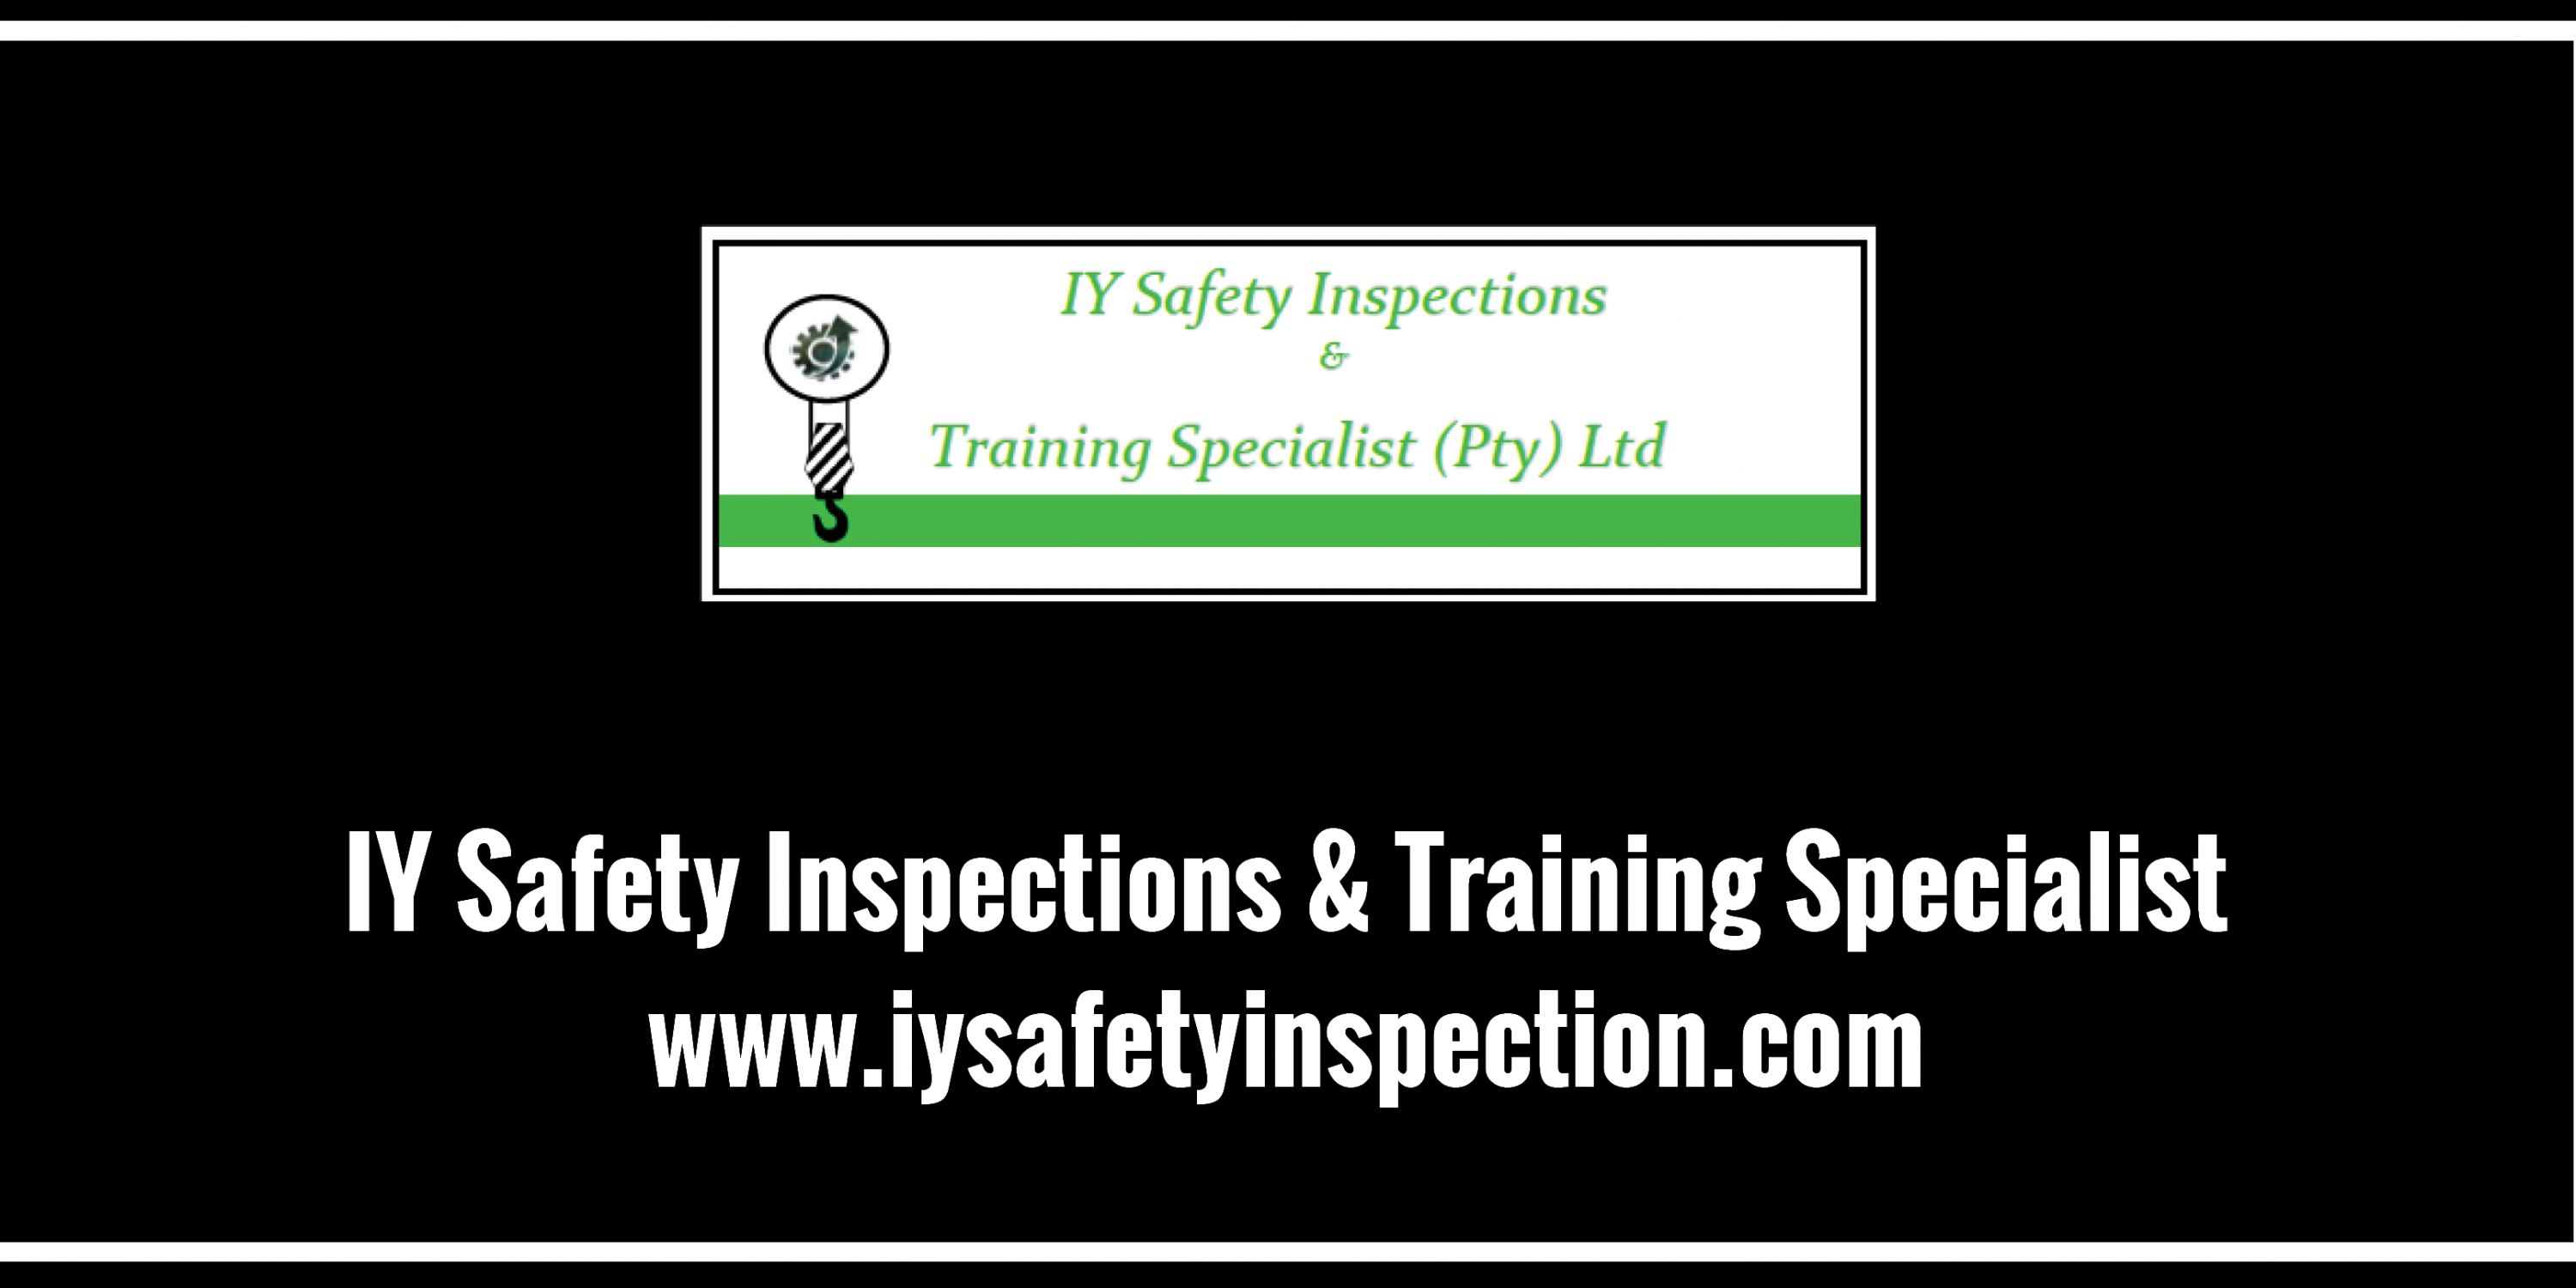 IY Safety Inspections & Training Specialist